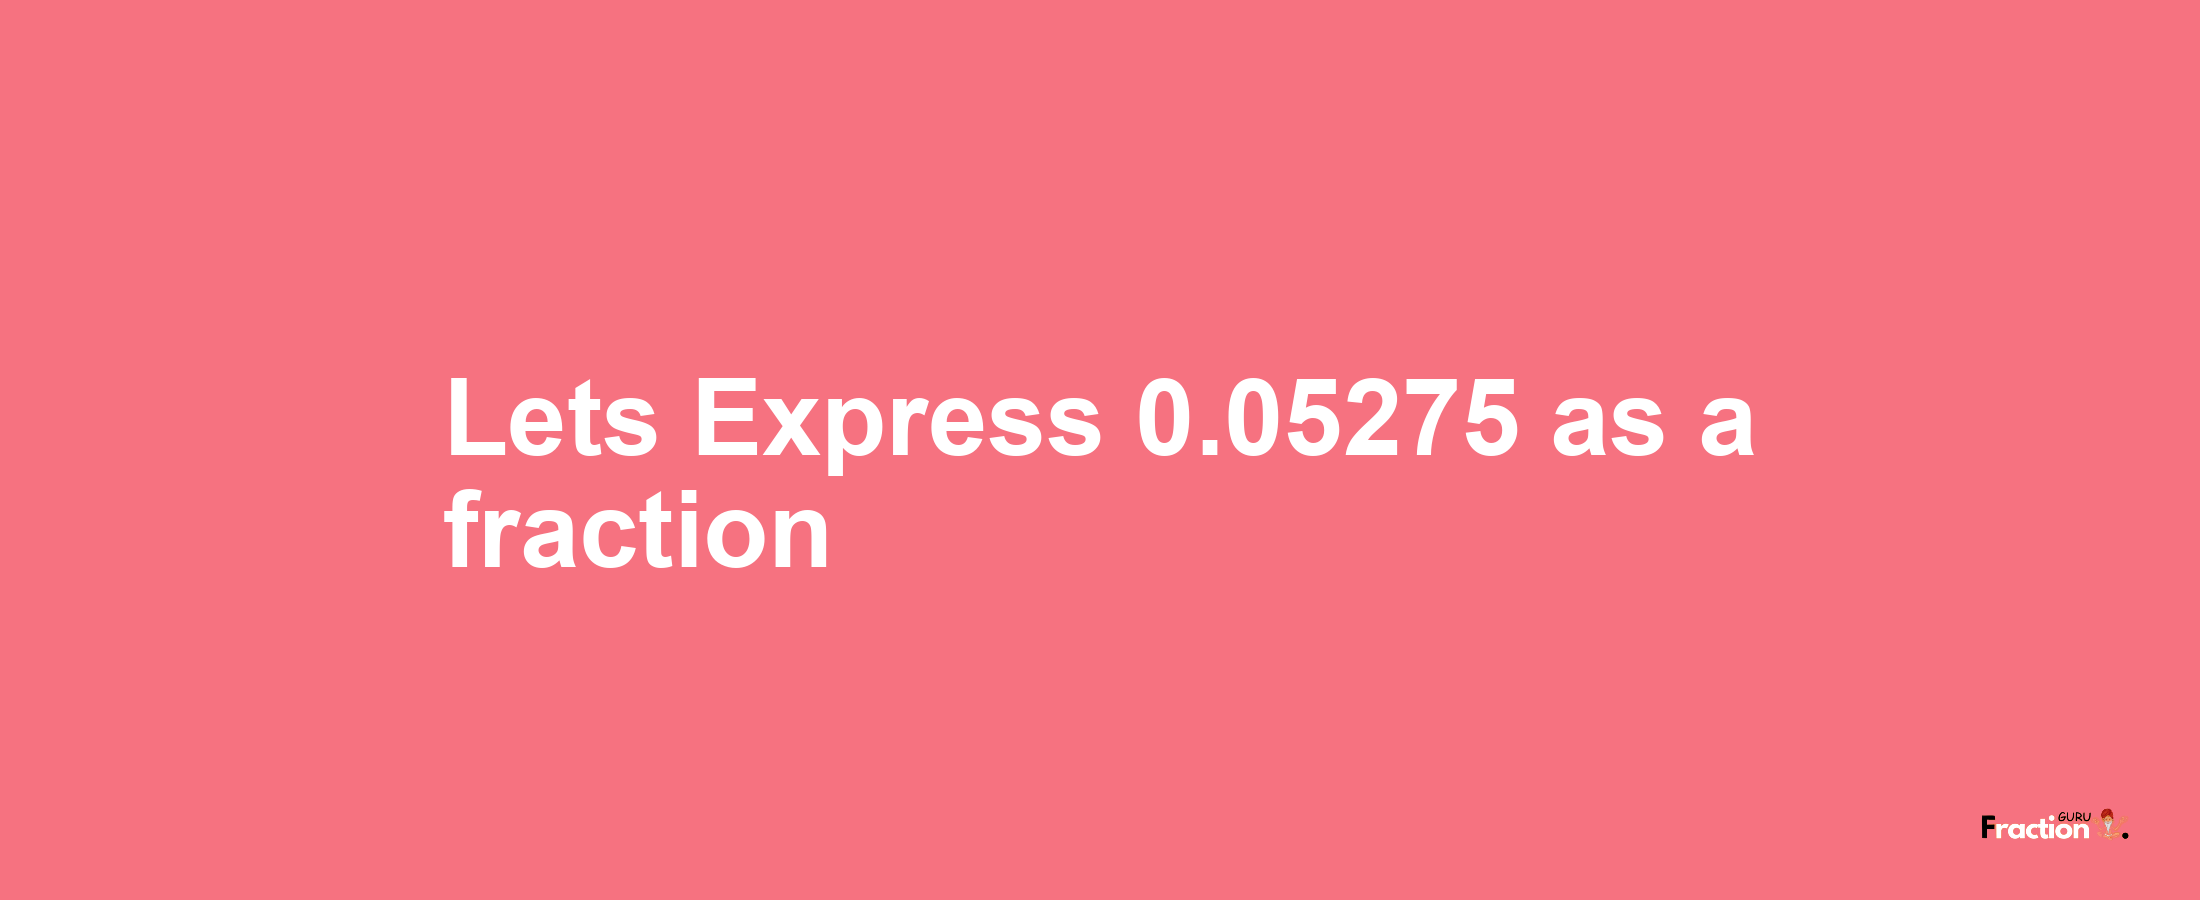 Lets Express 0.05275 as afraction